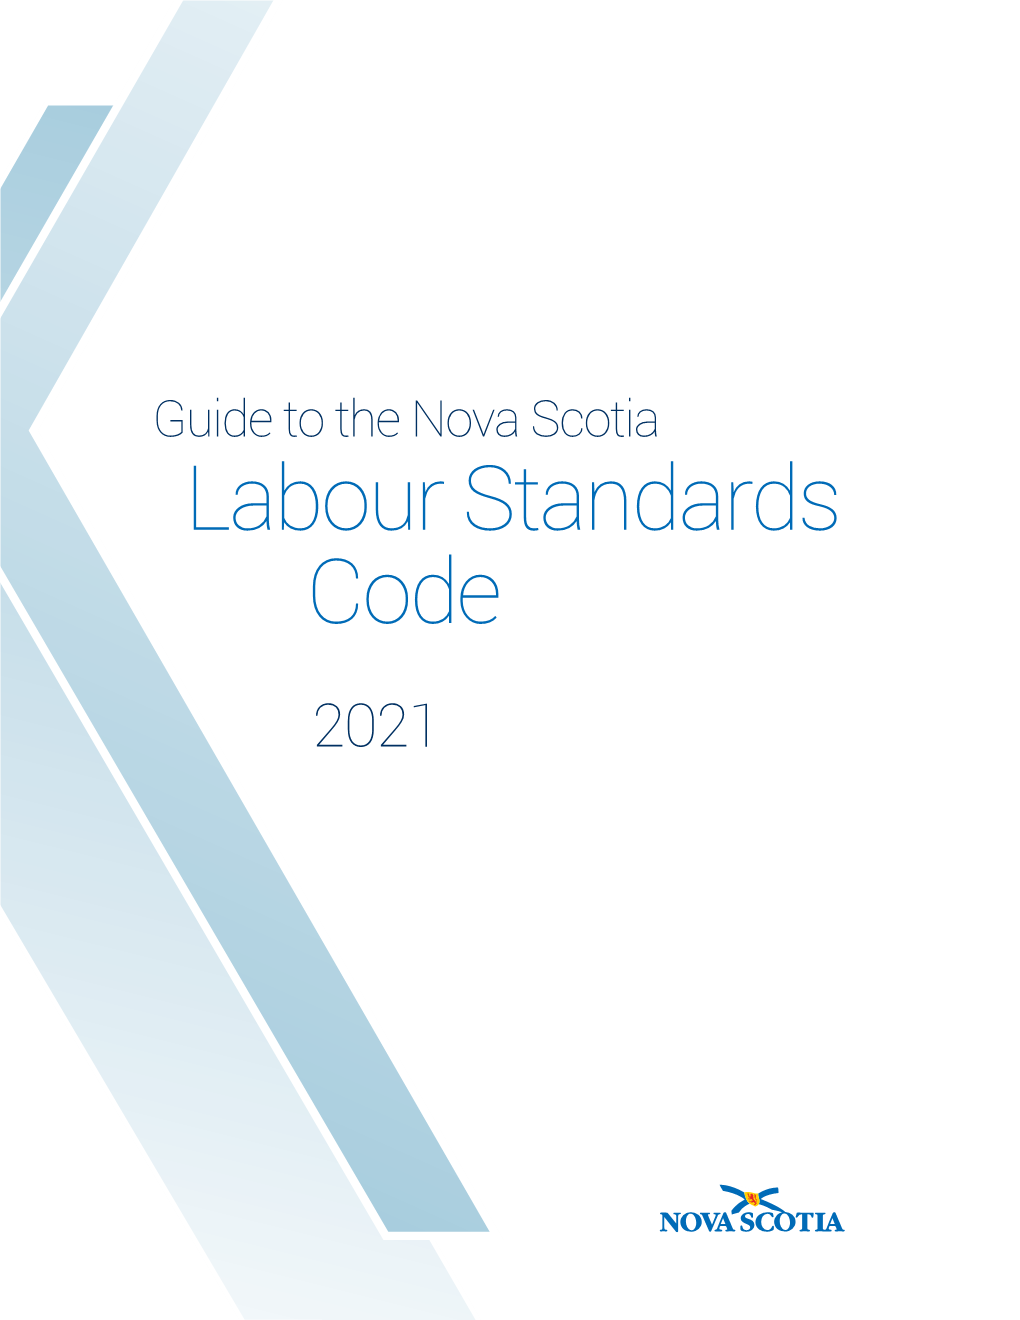 Guide to the Labour Standards Code